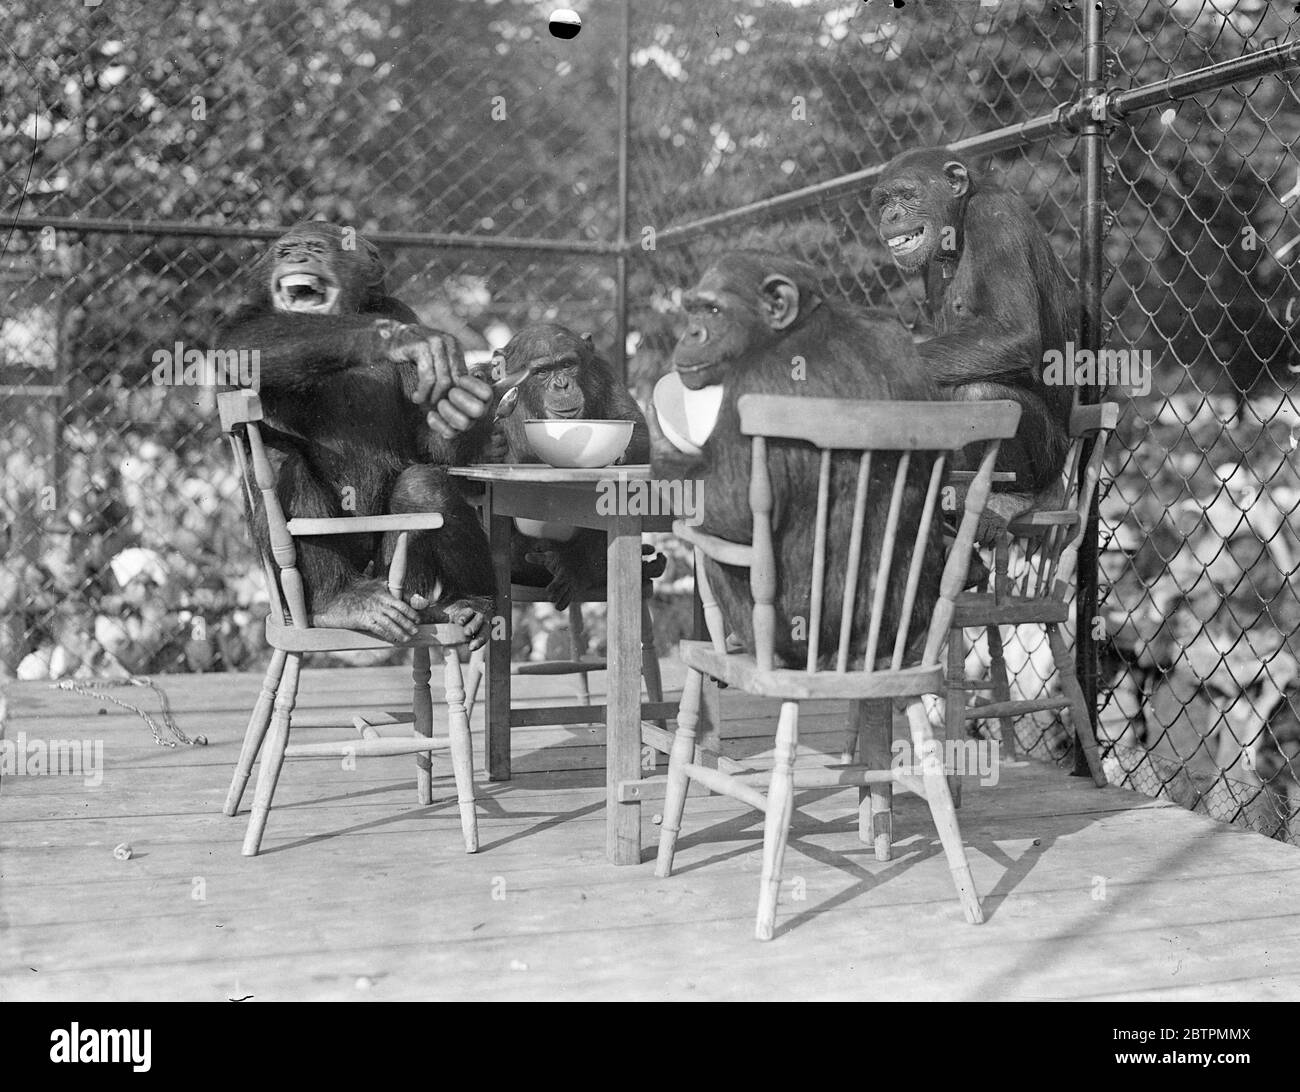 Spoons Are A Nuisance ! Photo shows : Chimpanzee noisily expresses his disaprooval of the service during the chimps ' tea party at the London Zoo . [ chimps sitting on chairs at a table , inside a cage ] 25 Aug 1936 Original caption from negative Stock Photo